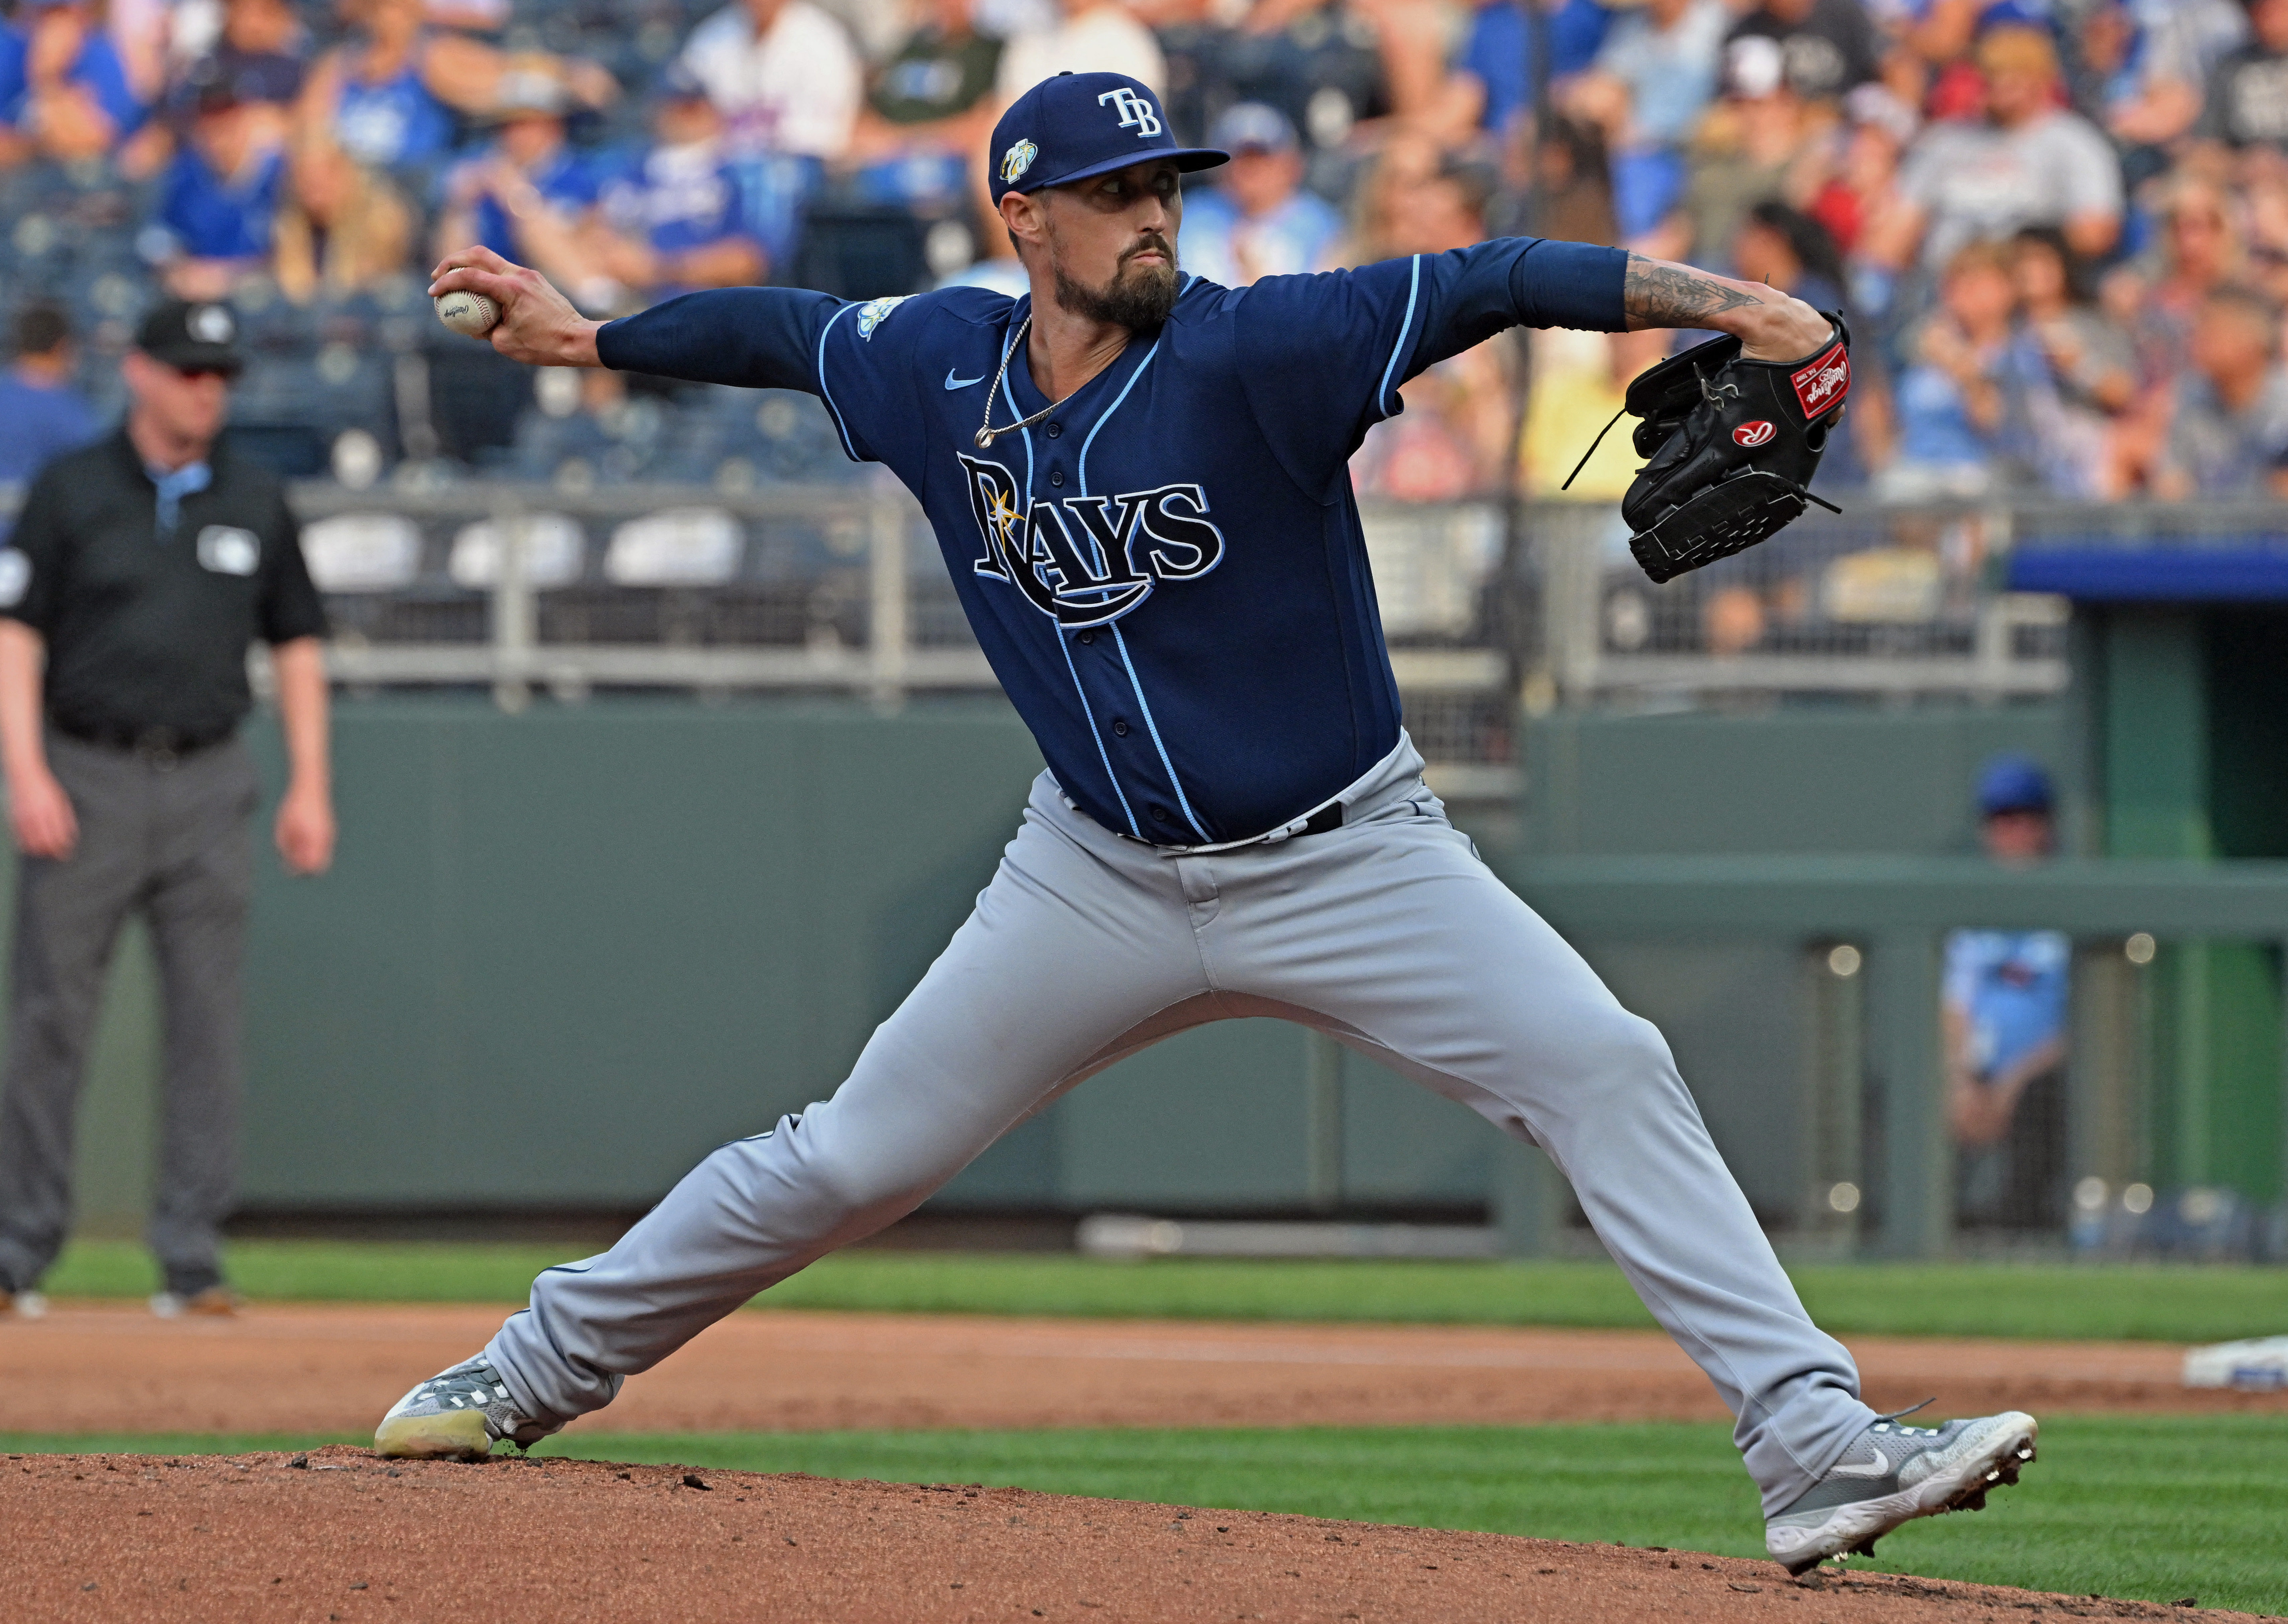 Rays triumph over Royals